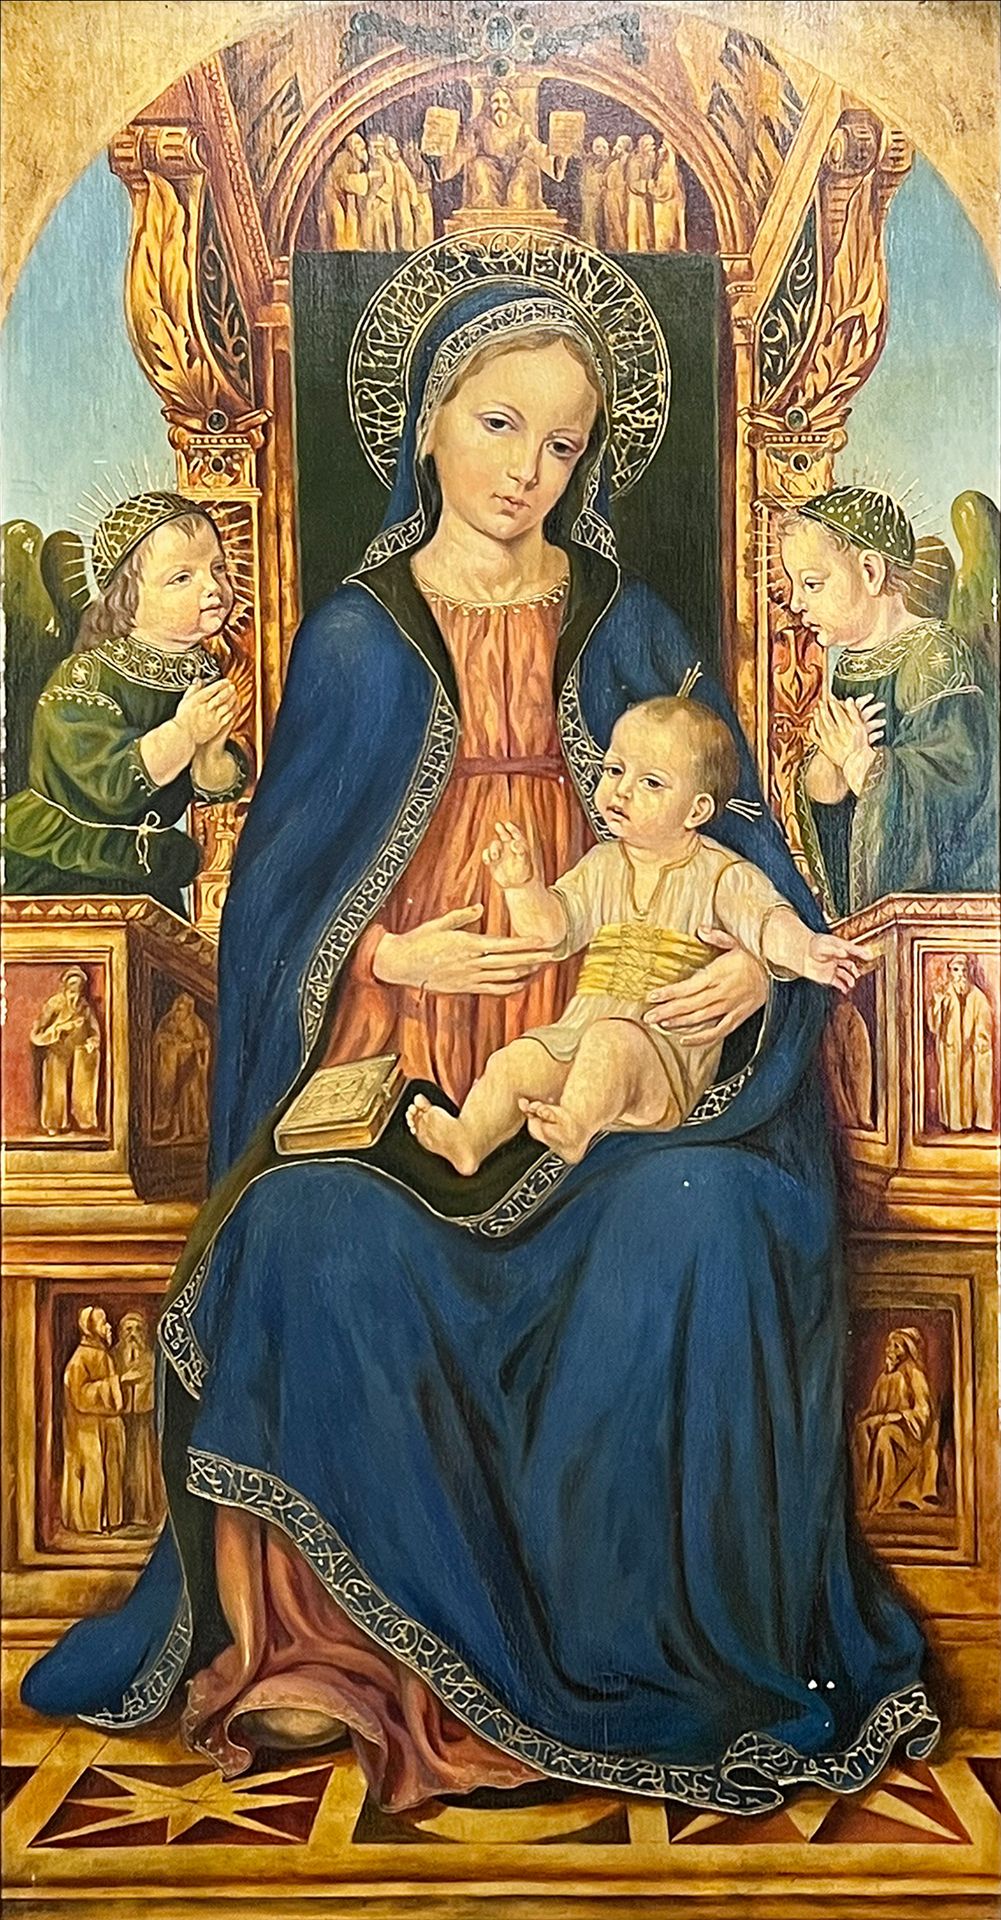 UNSIGNED (XX). Madonna with Child Jesus. Probably 19th century. Italy.